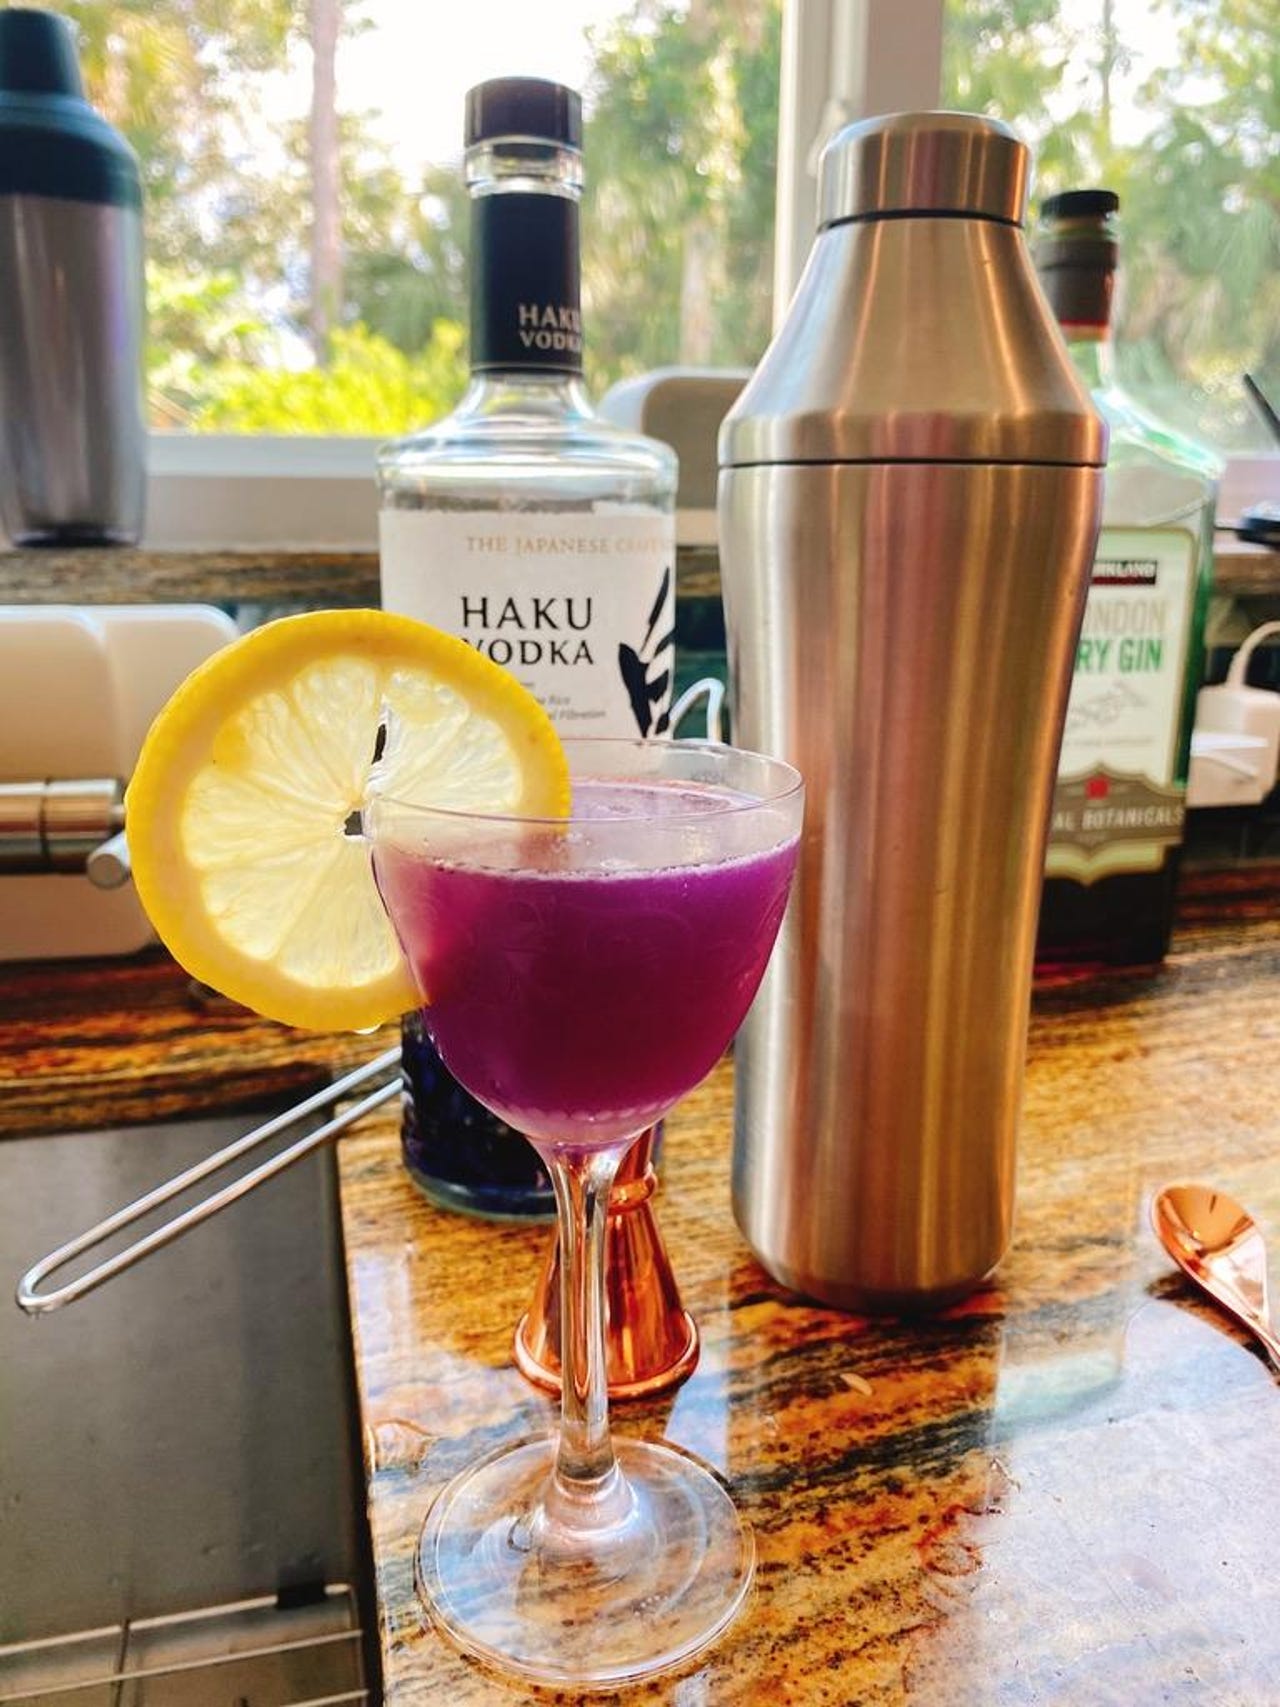 Elevated Craft: The last cocktail shaker you will ever buy